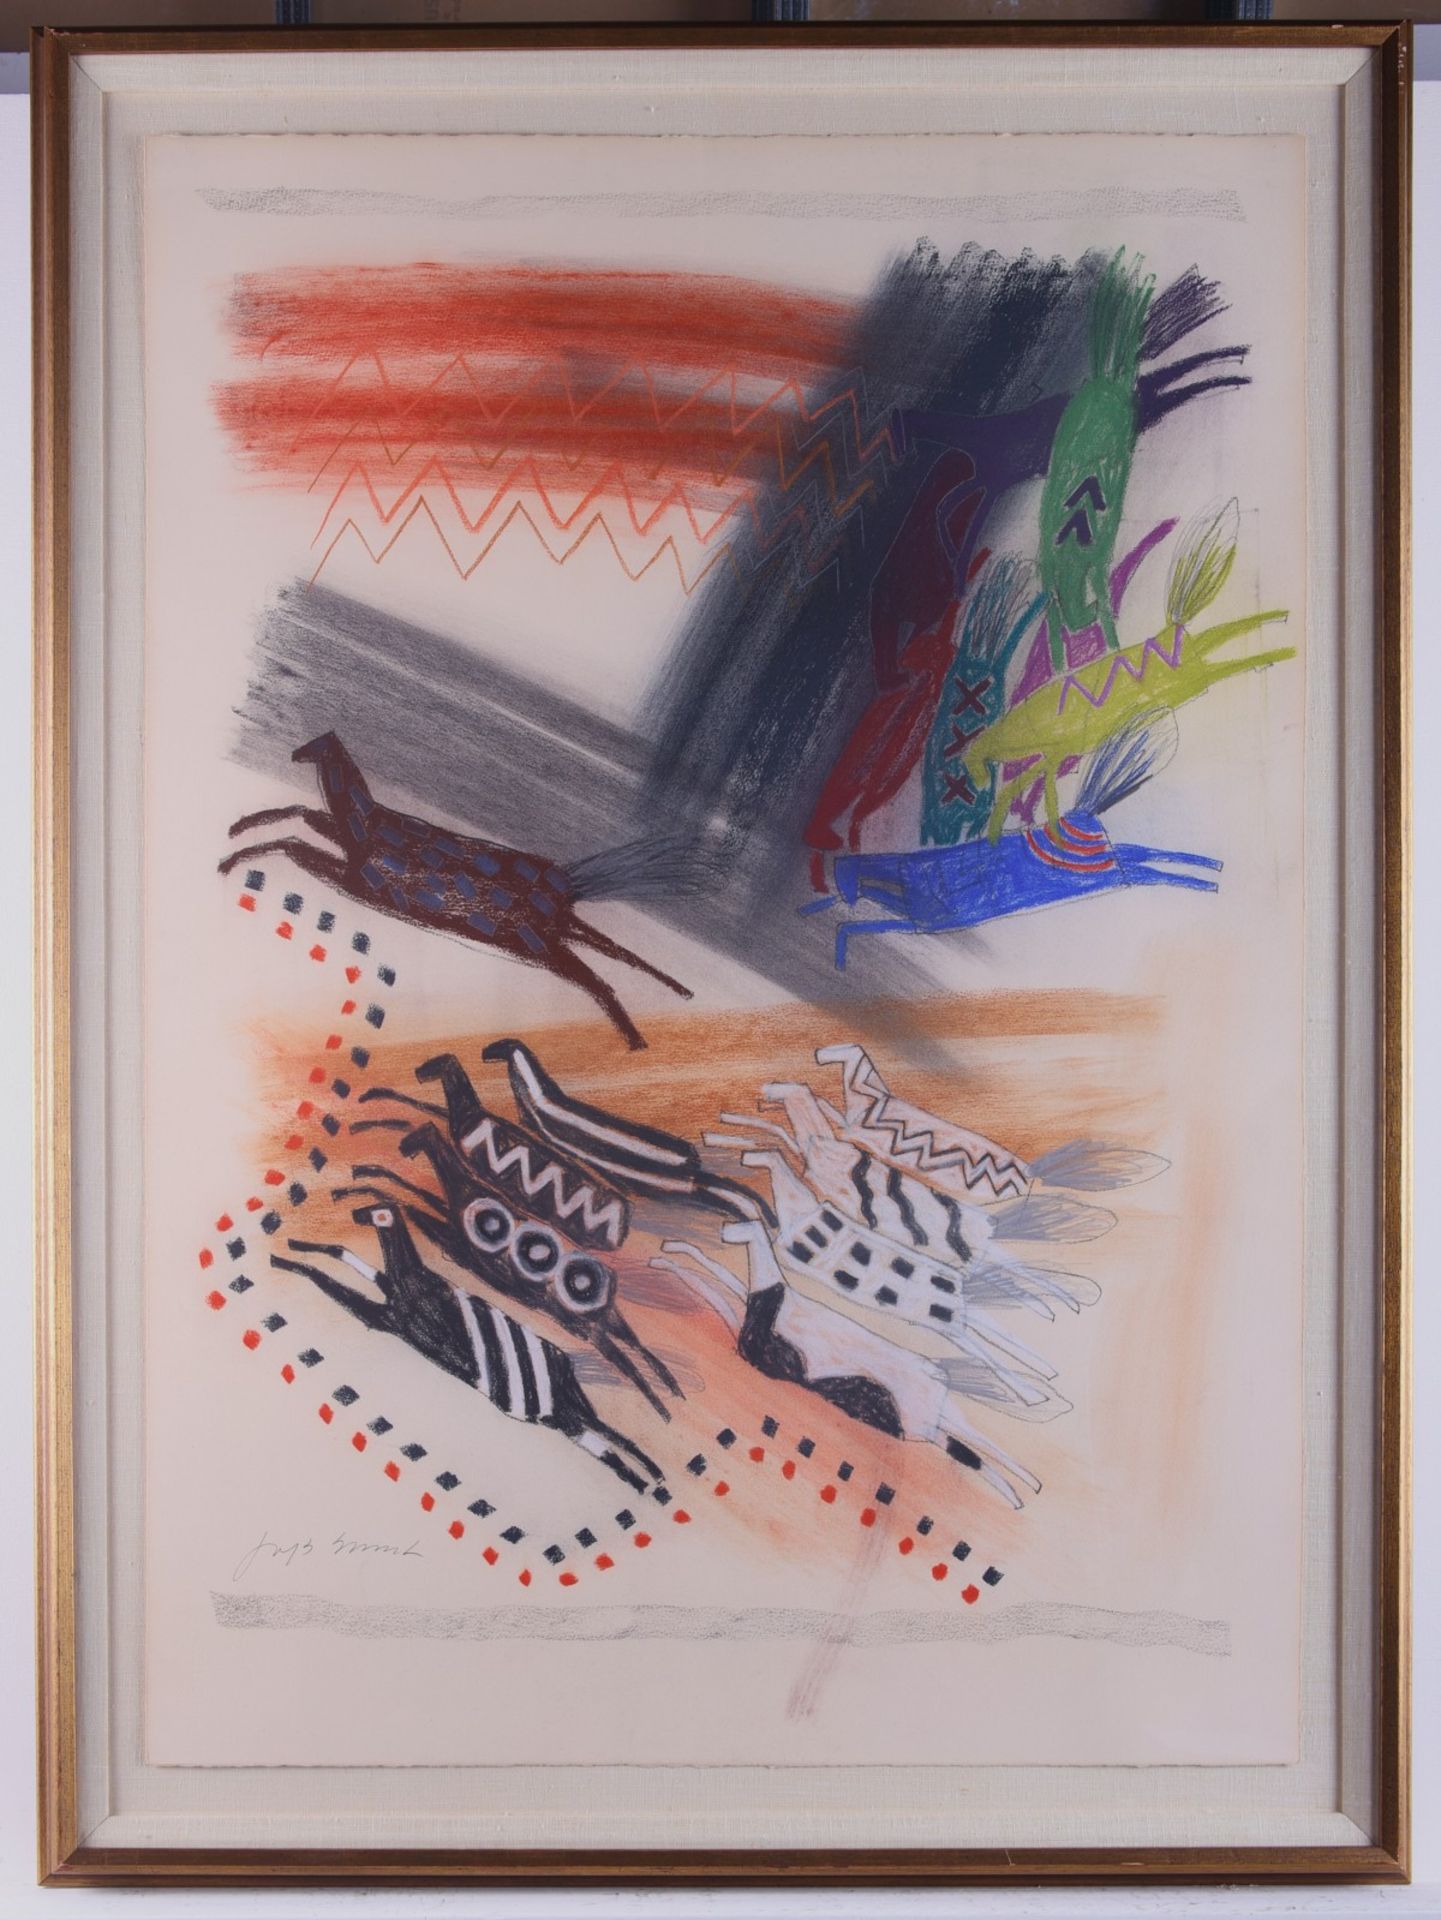 Jaune Quick-To-See Smith Pastel Black Elk's Dream A - Image 2 of 3